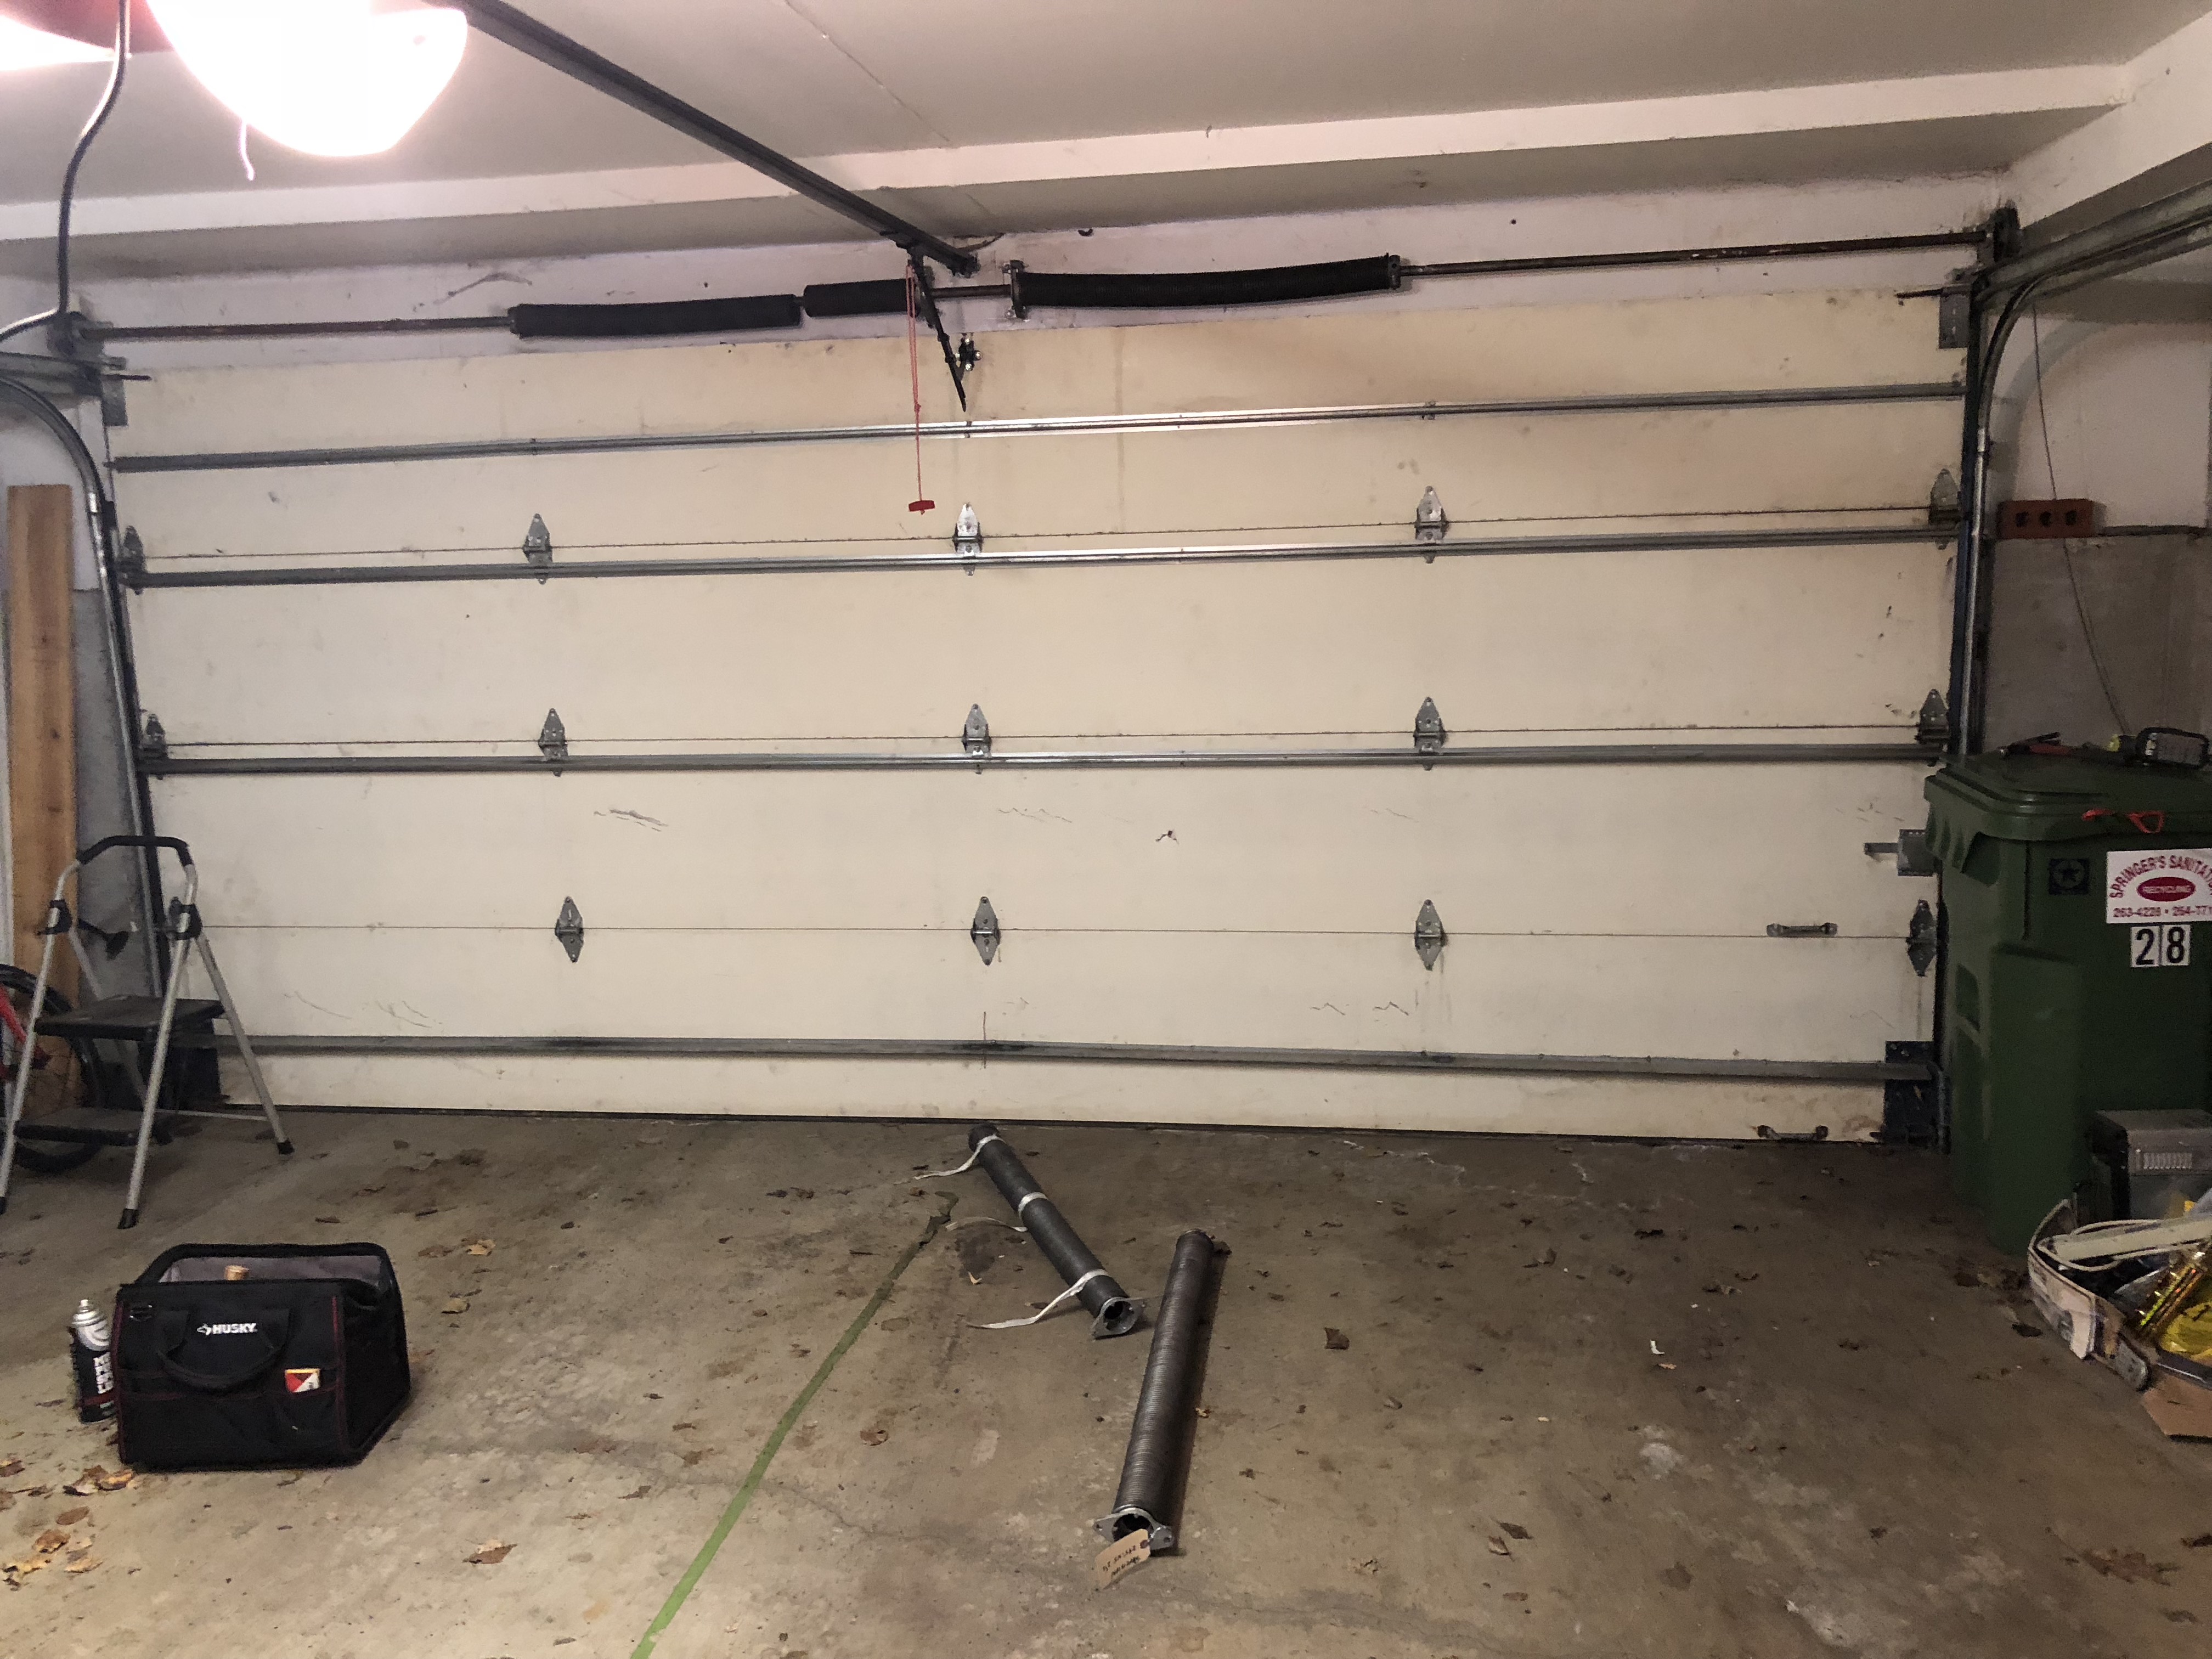 Modern Garage Door To Fix It for Large Space